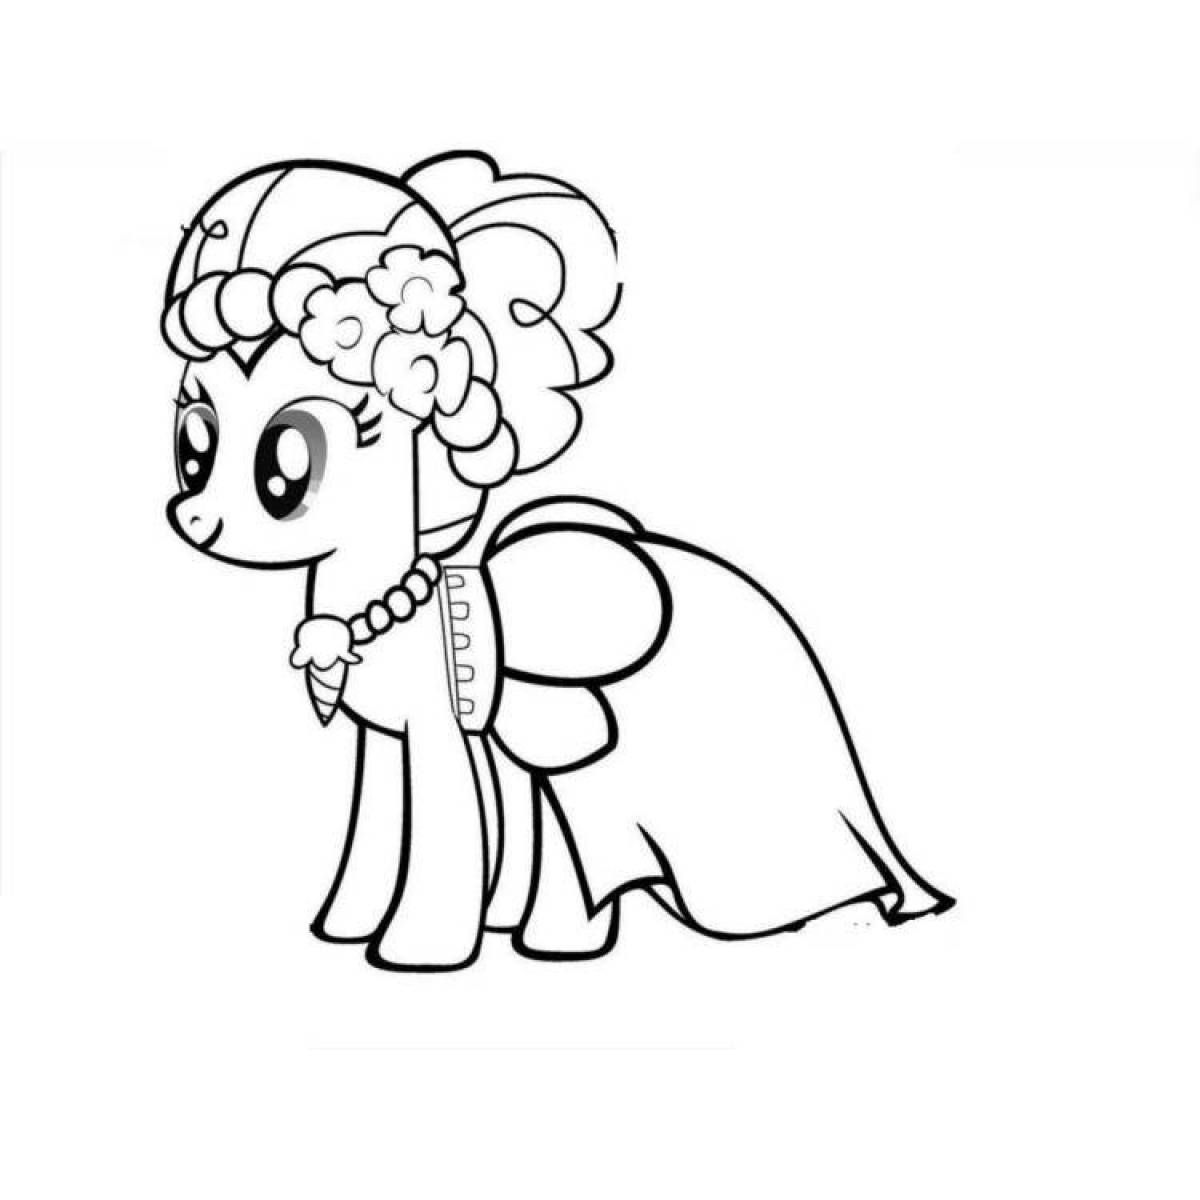 Awesome pony game time coloring page